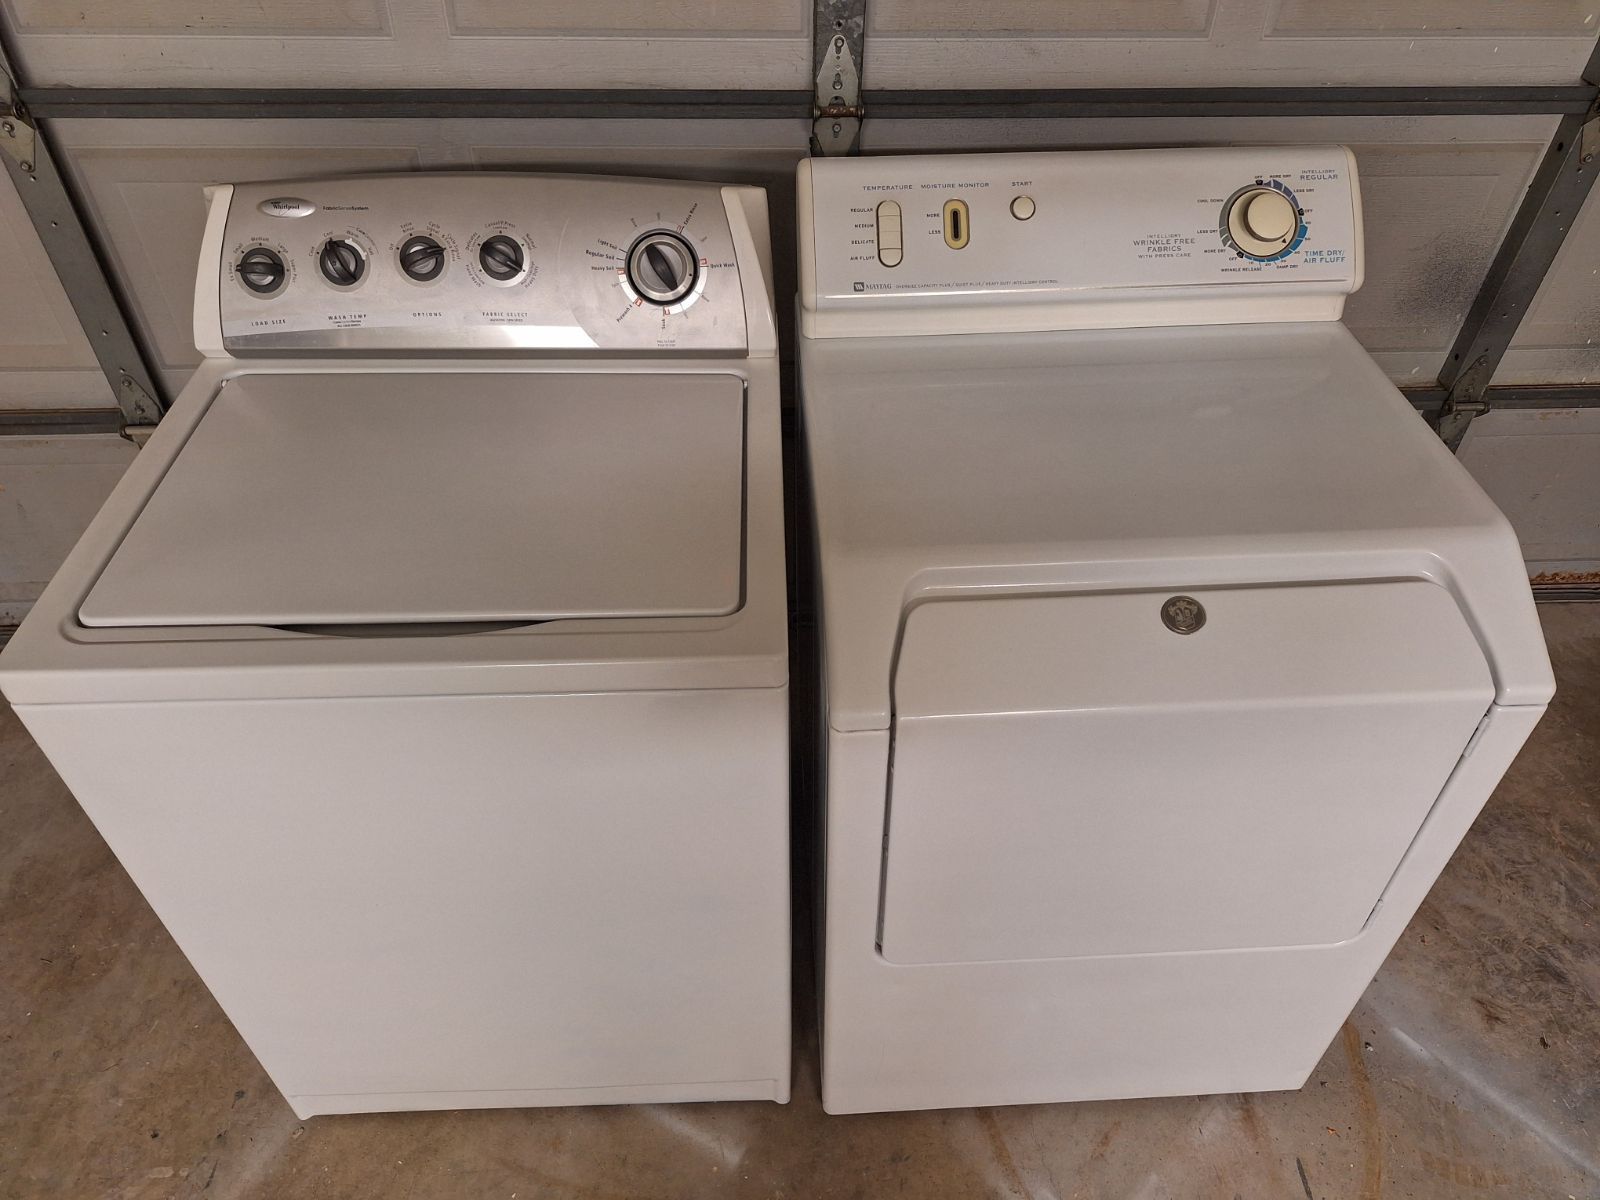 WHIRLPOOL WASHER AND MAYTAG GAS DRYER $380 DELIVERED AND INSTALLED 90 DAY WARRANTY 